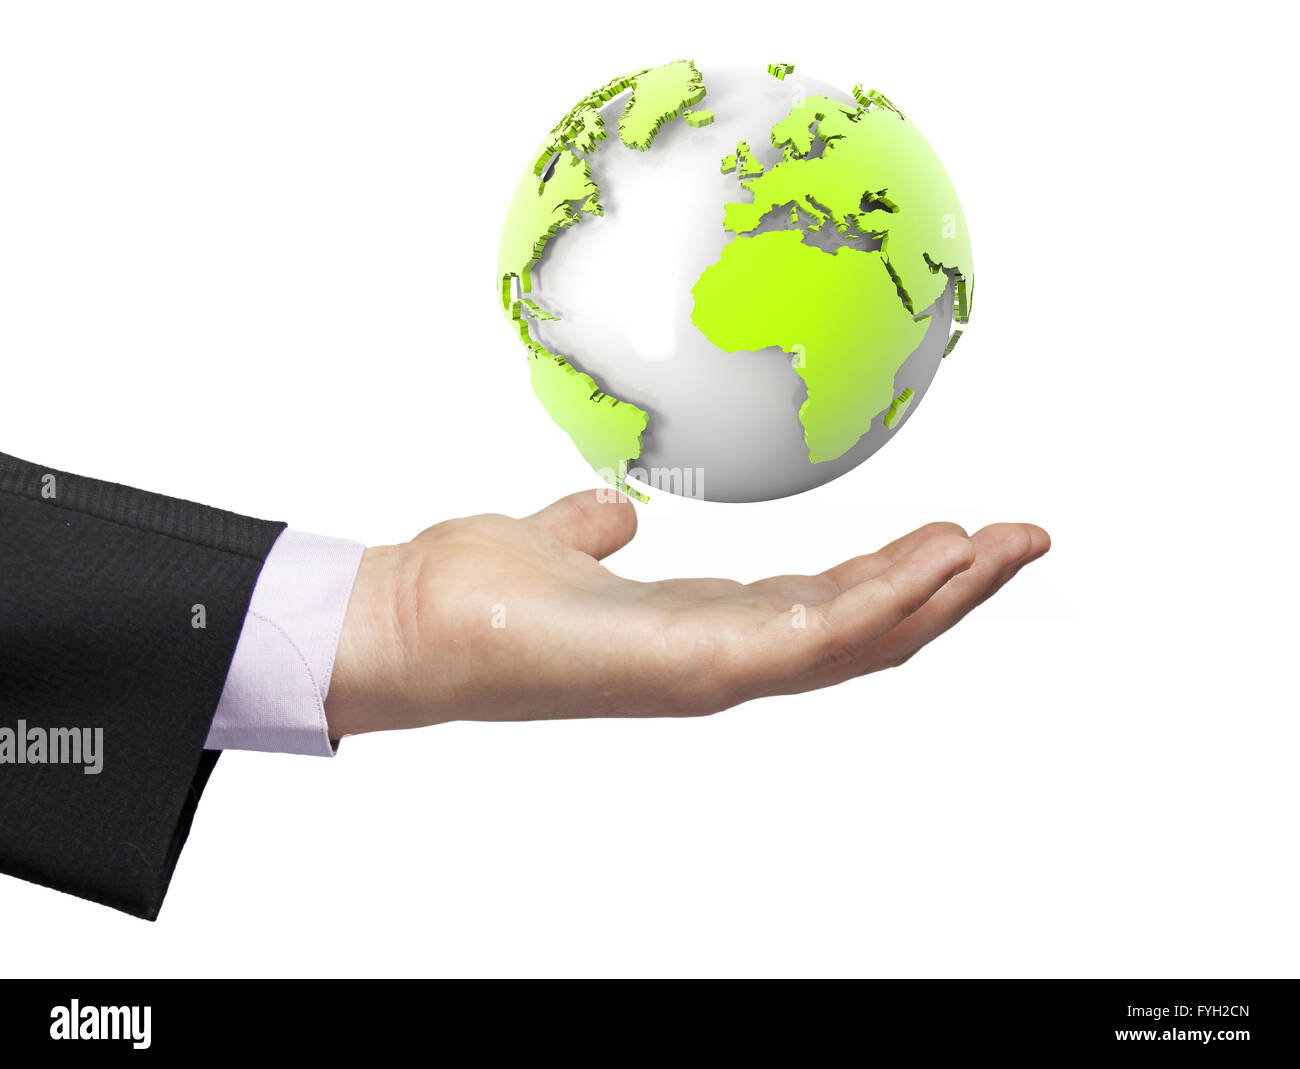 global concept: earth render focused on europe and afrika over a businessman hand Stock Photo